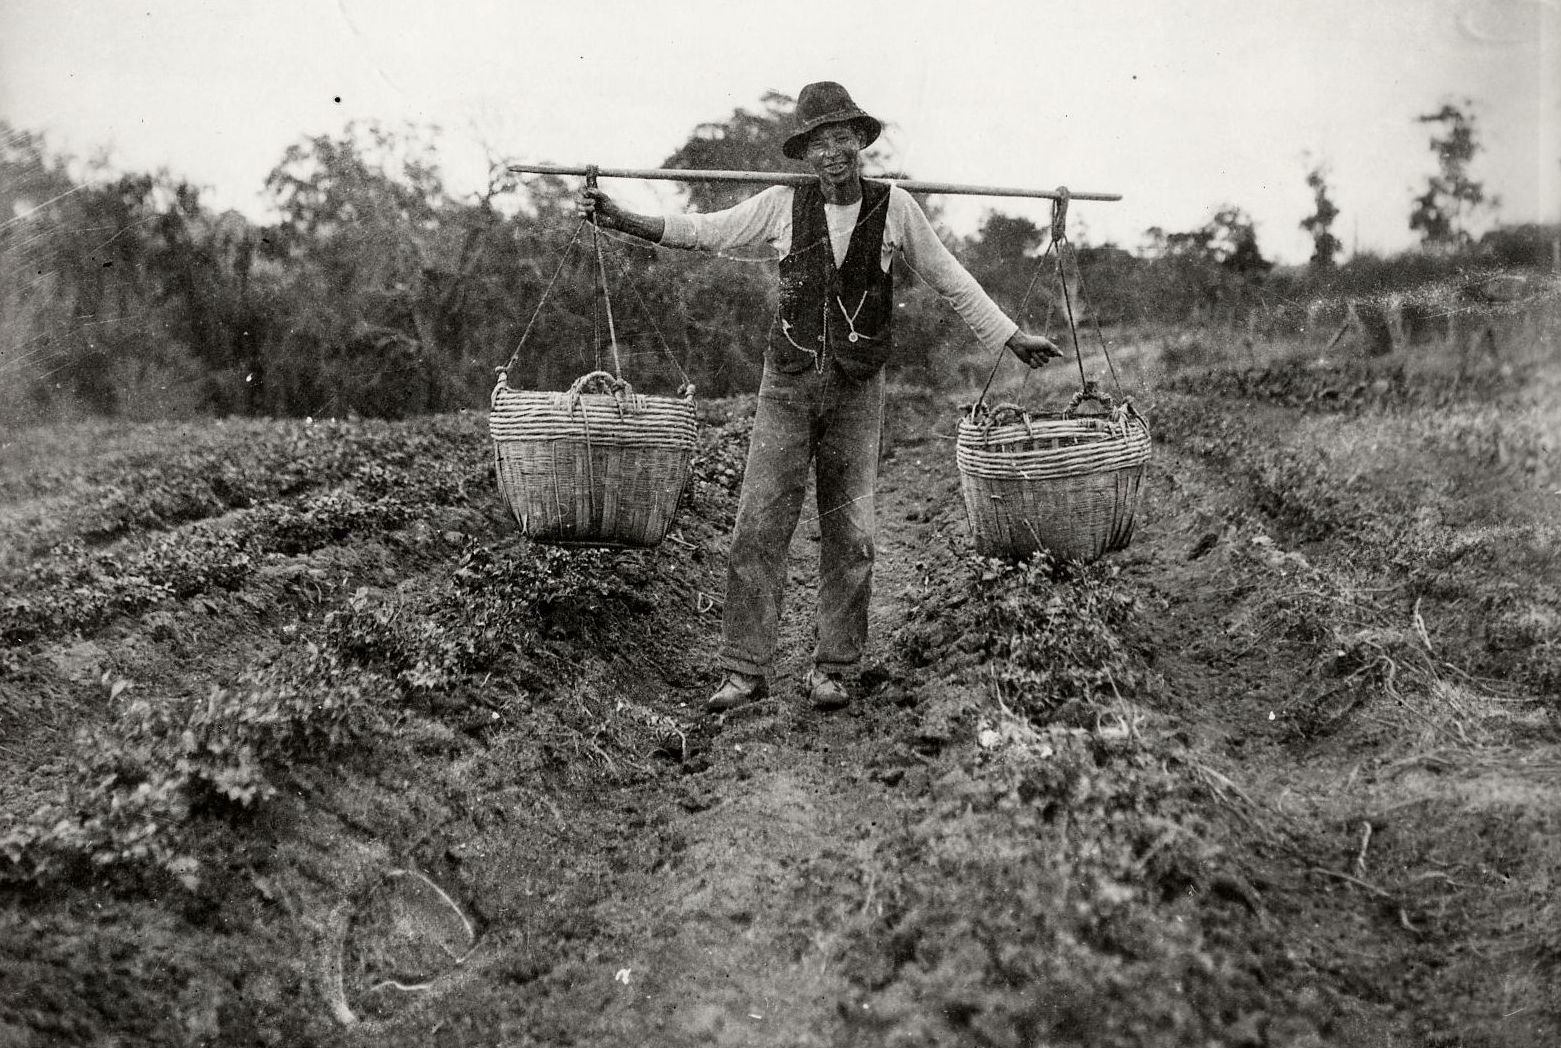 Chinese man carrying baskets in a field